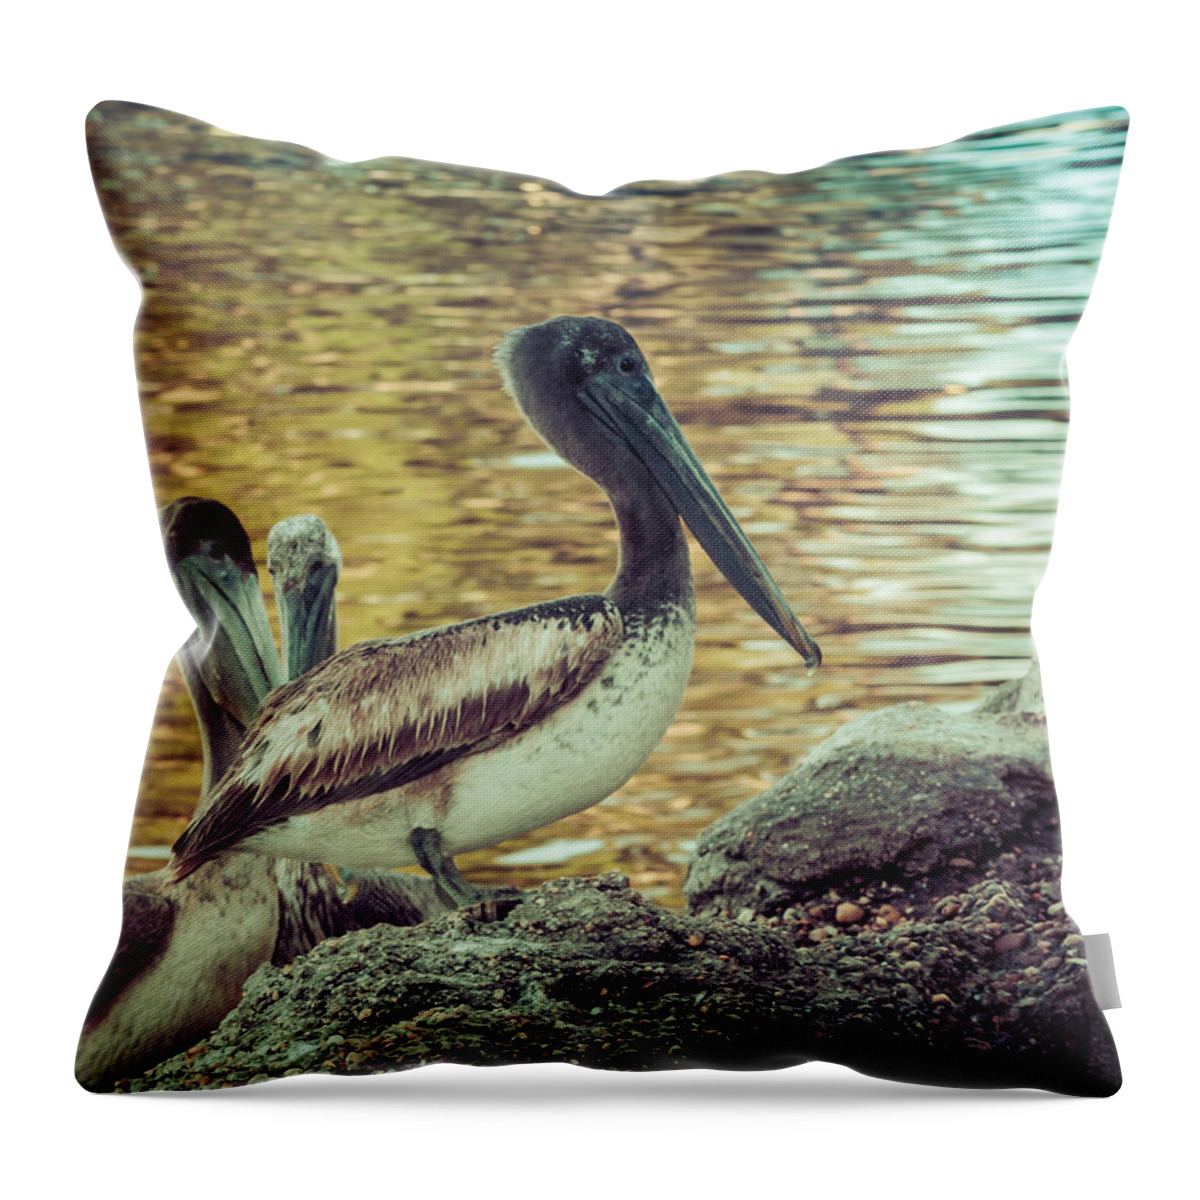 Florida Pelican Throw Pillow featuring the photograph Pelicans On Rocks 3 by Debra Forand